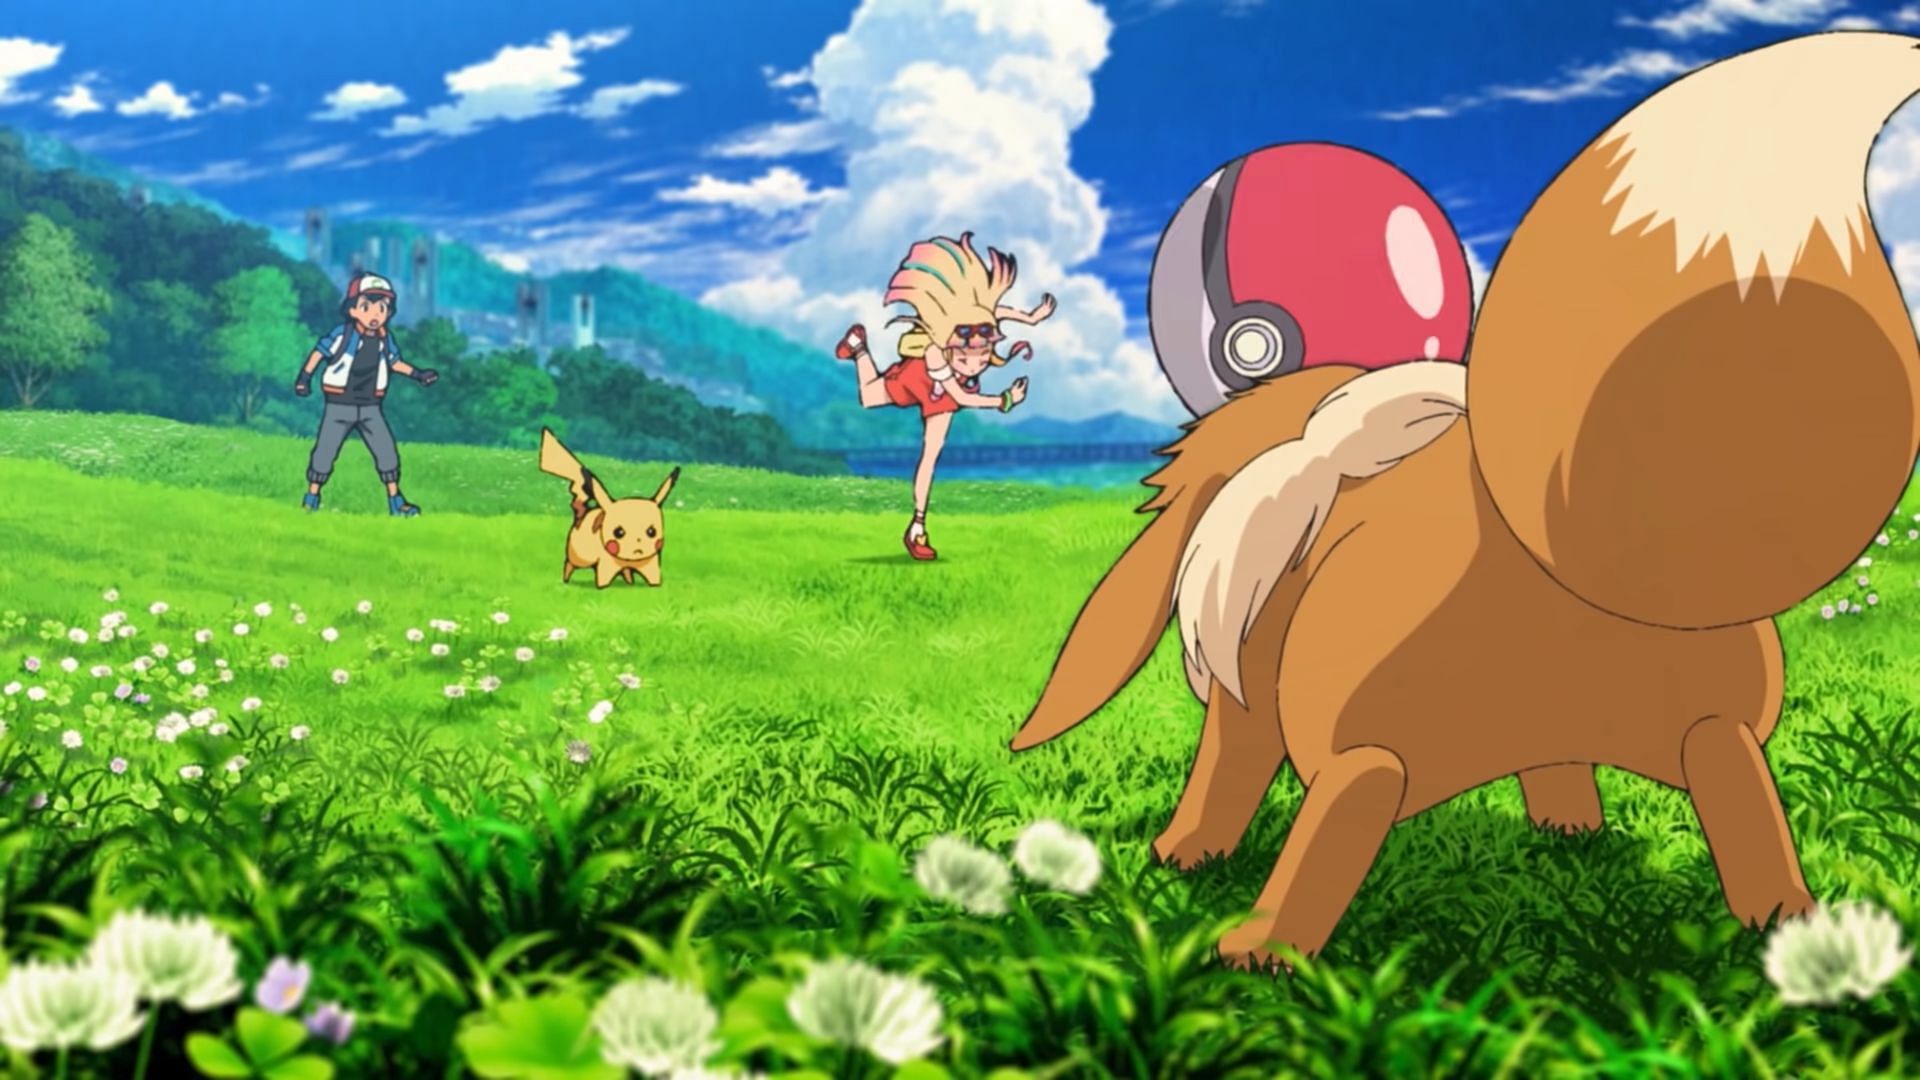 Ash helps Risa catch a wild Eevee in The Power of Us animated movie (Image via The Pokemon Company)